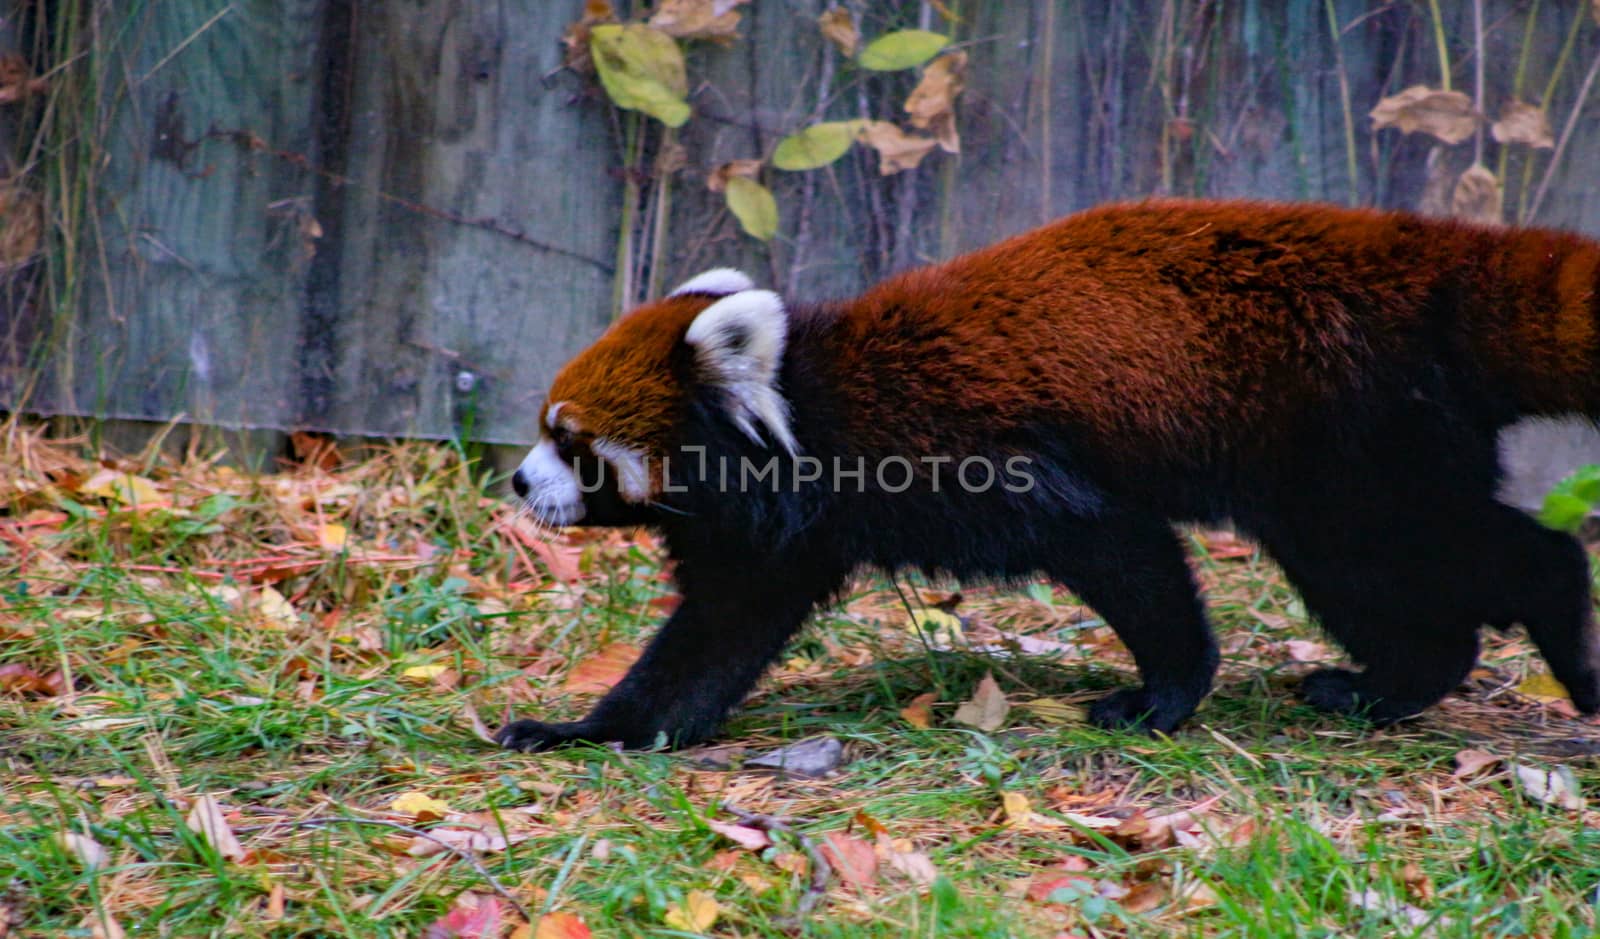 Red panda walking on the ground, close up photo shows the amazing colour the animal has.